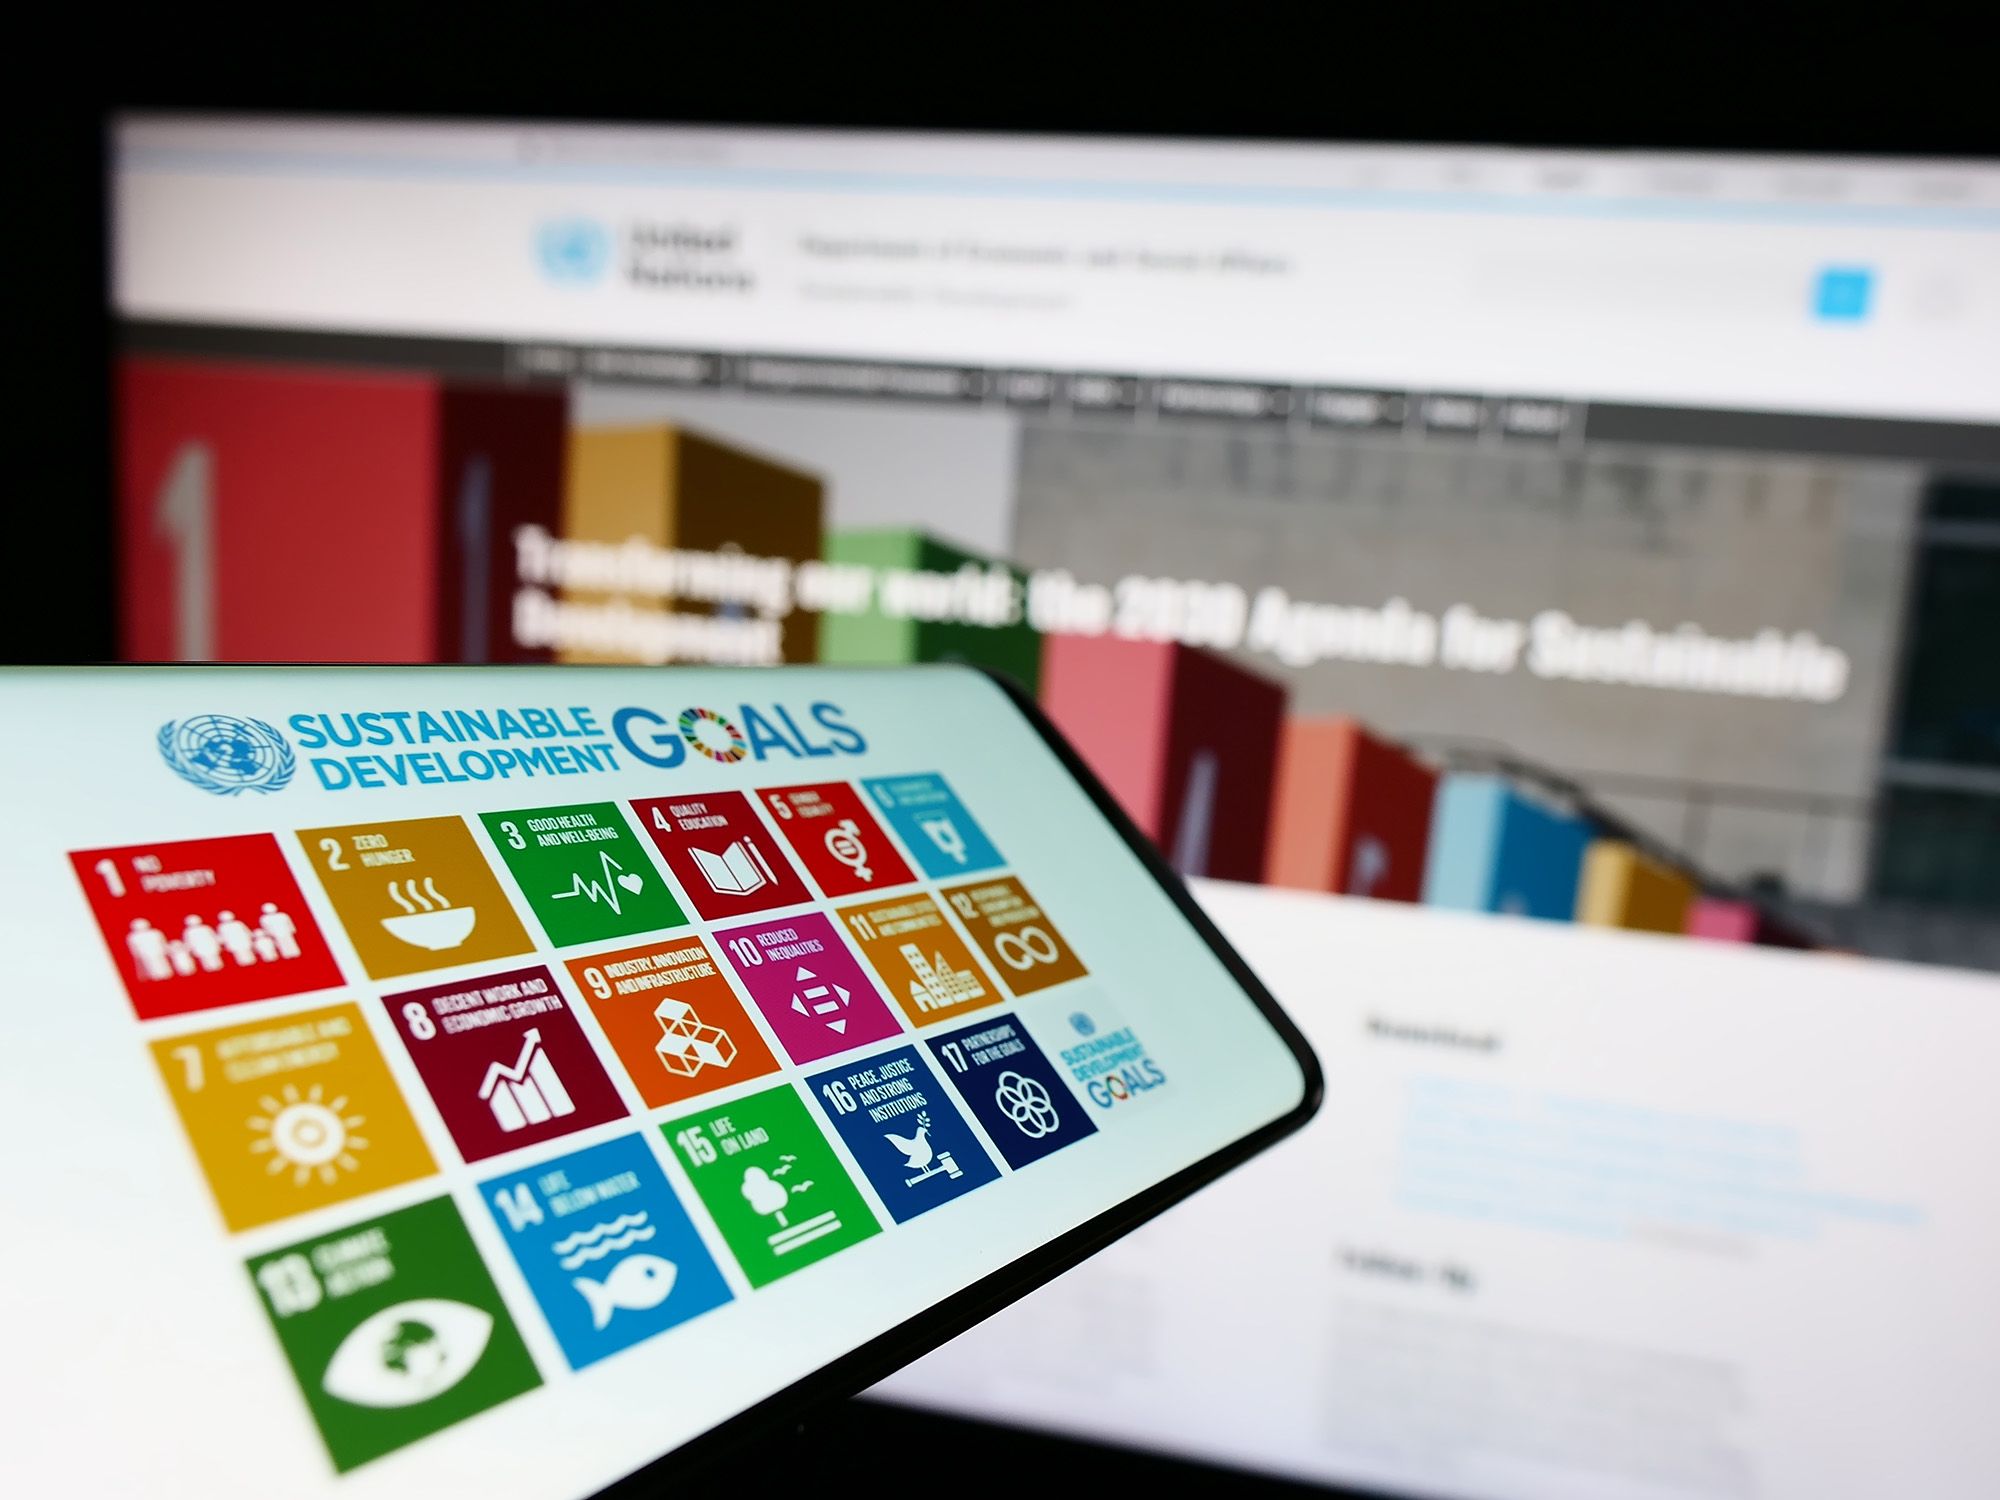 We aren’t on track to meet the SDGs. Digital solutions can help.